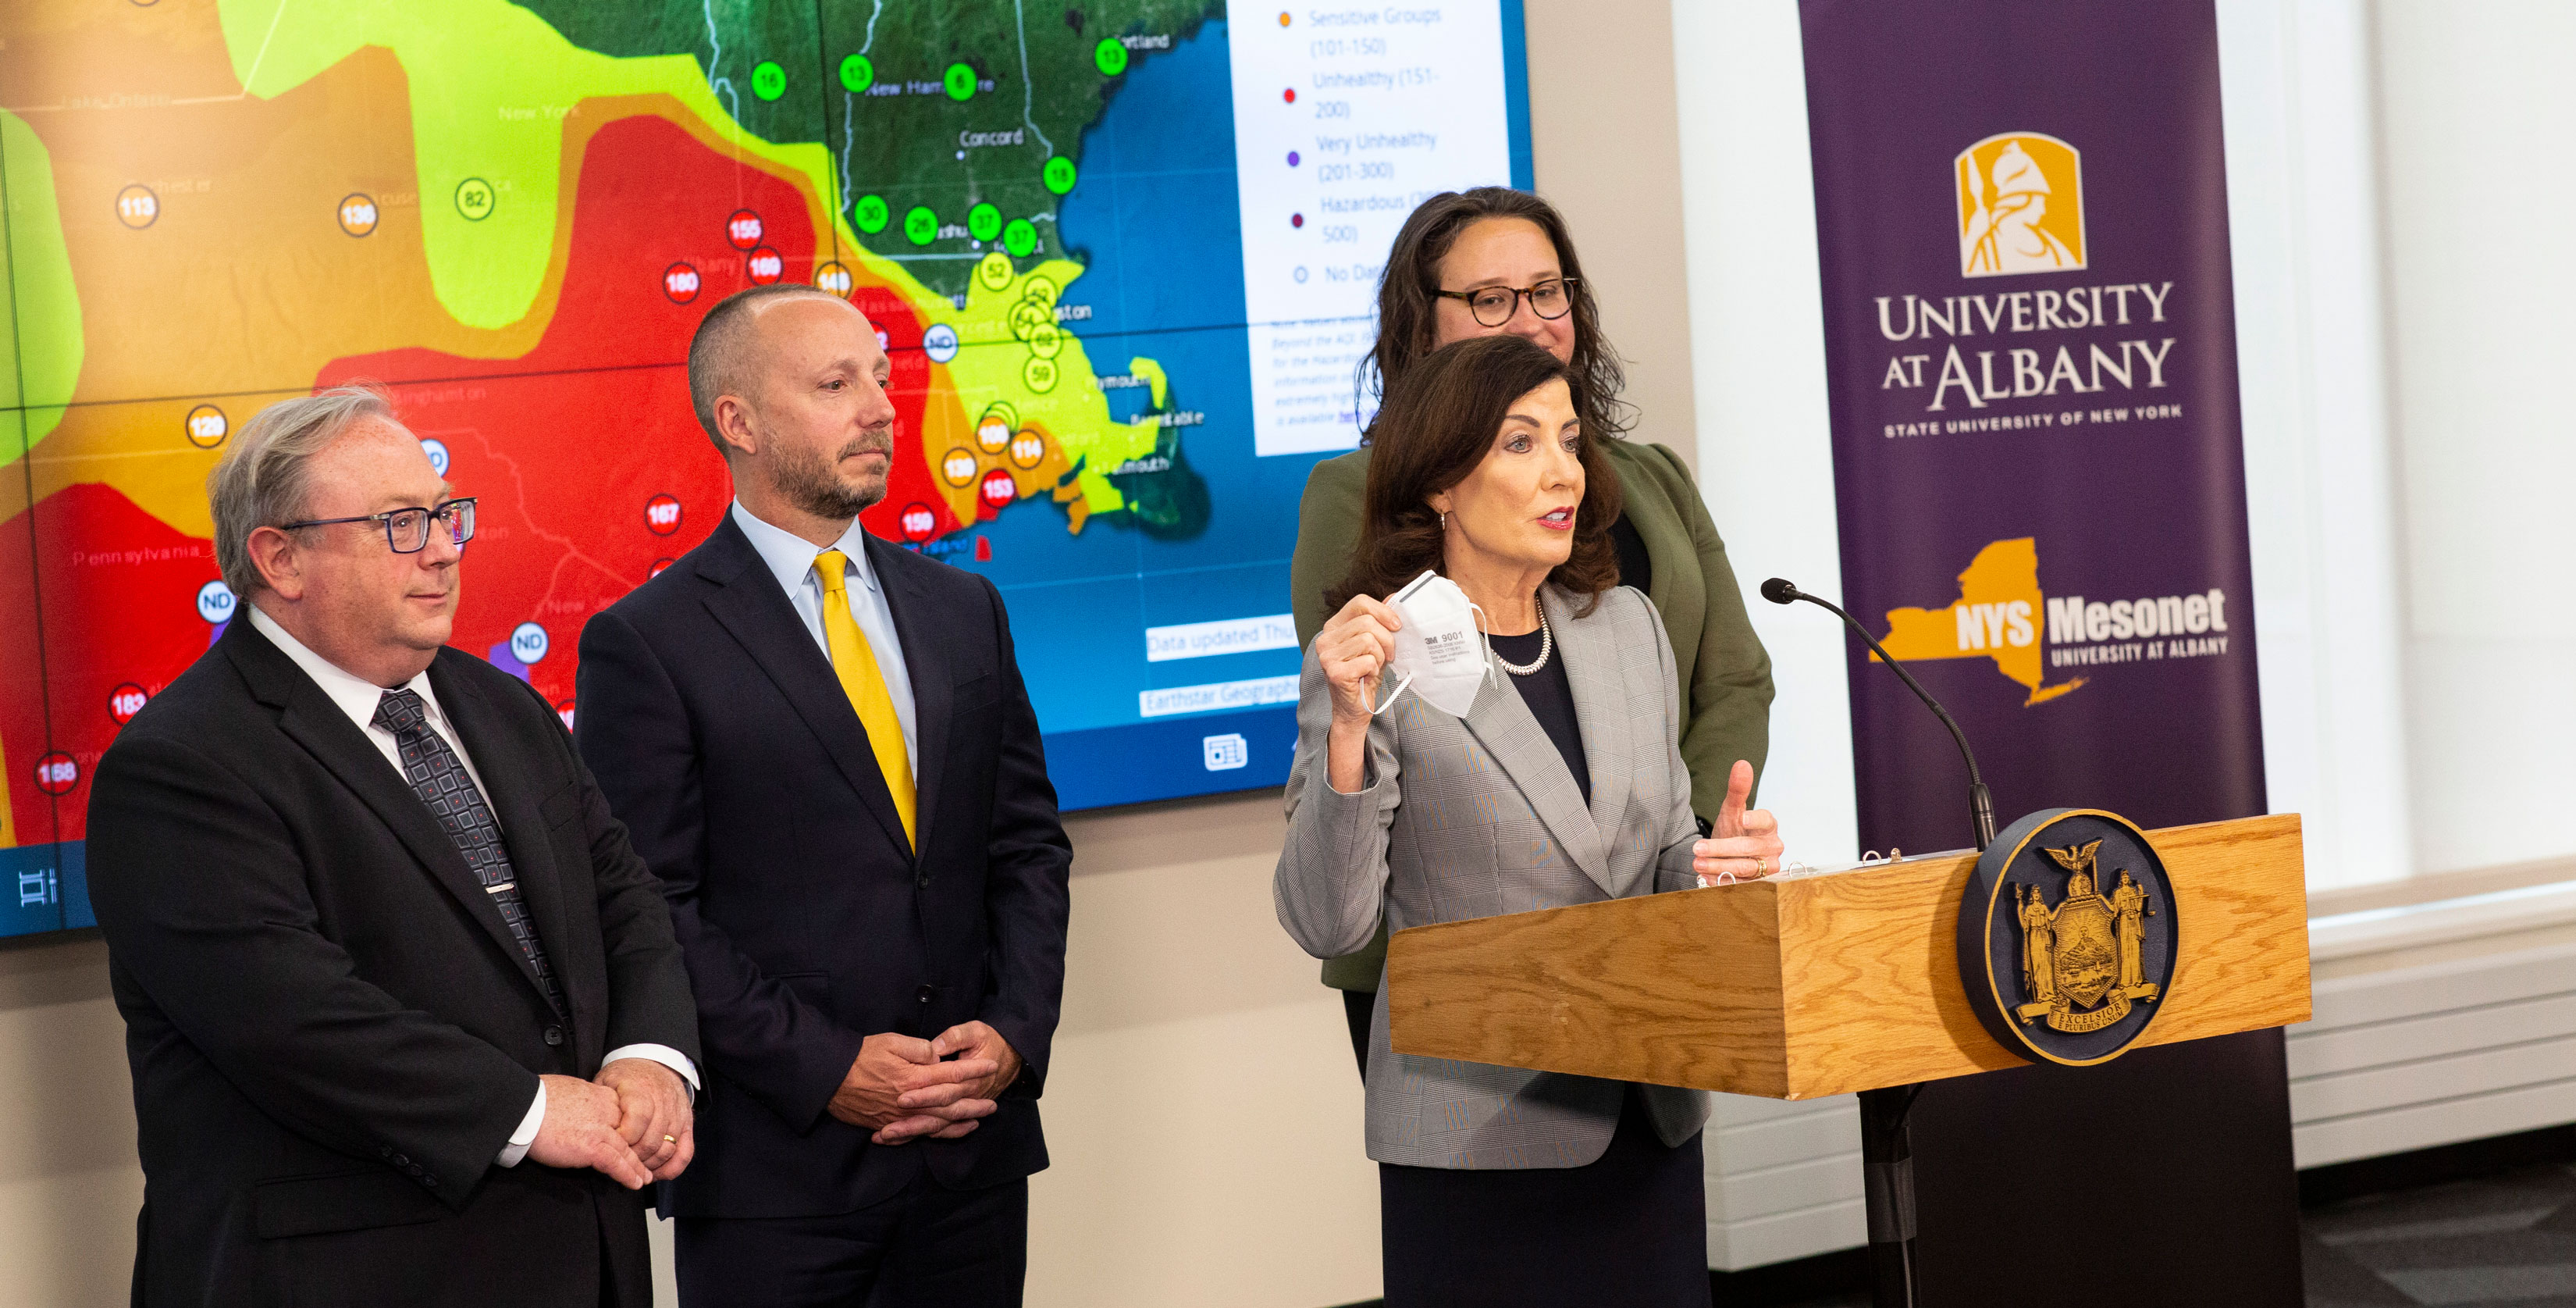 New York State Governor Kathy Hochul holds up a face mask and speaks at a press conference while standing in front of a NYS Mesonet map and UAlbany logo.